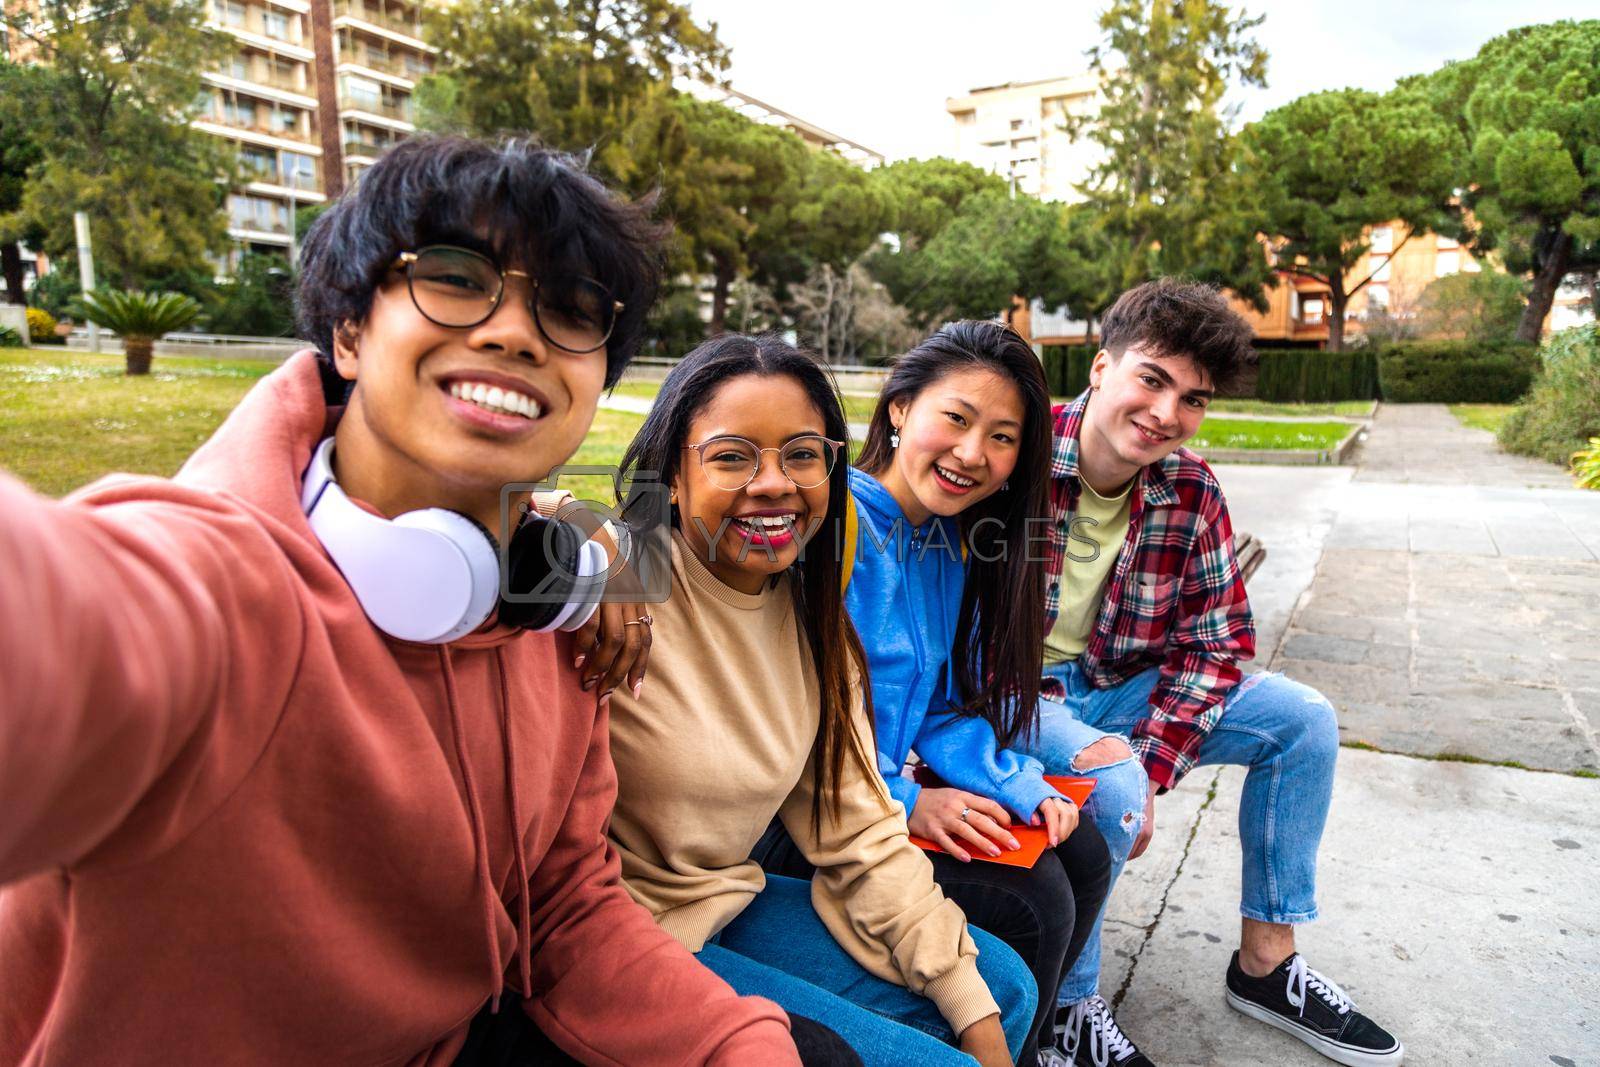 Group of multiracial college student friends taking selfie with phone outside. Students laughing and having fun in park. Youth lifestyle concept.